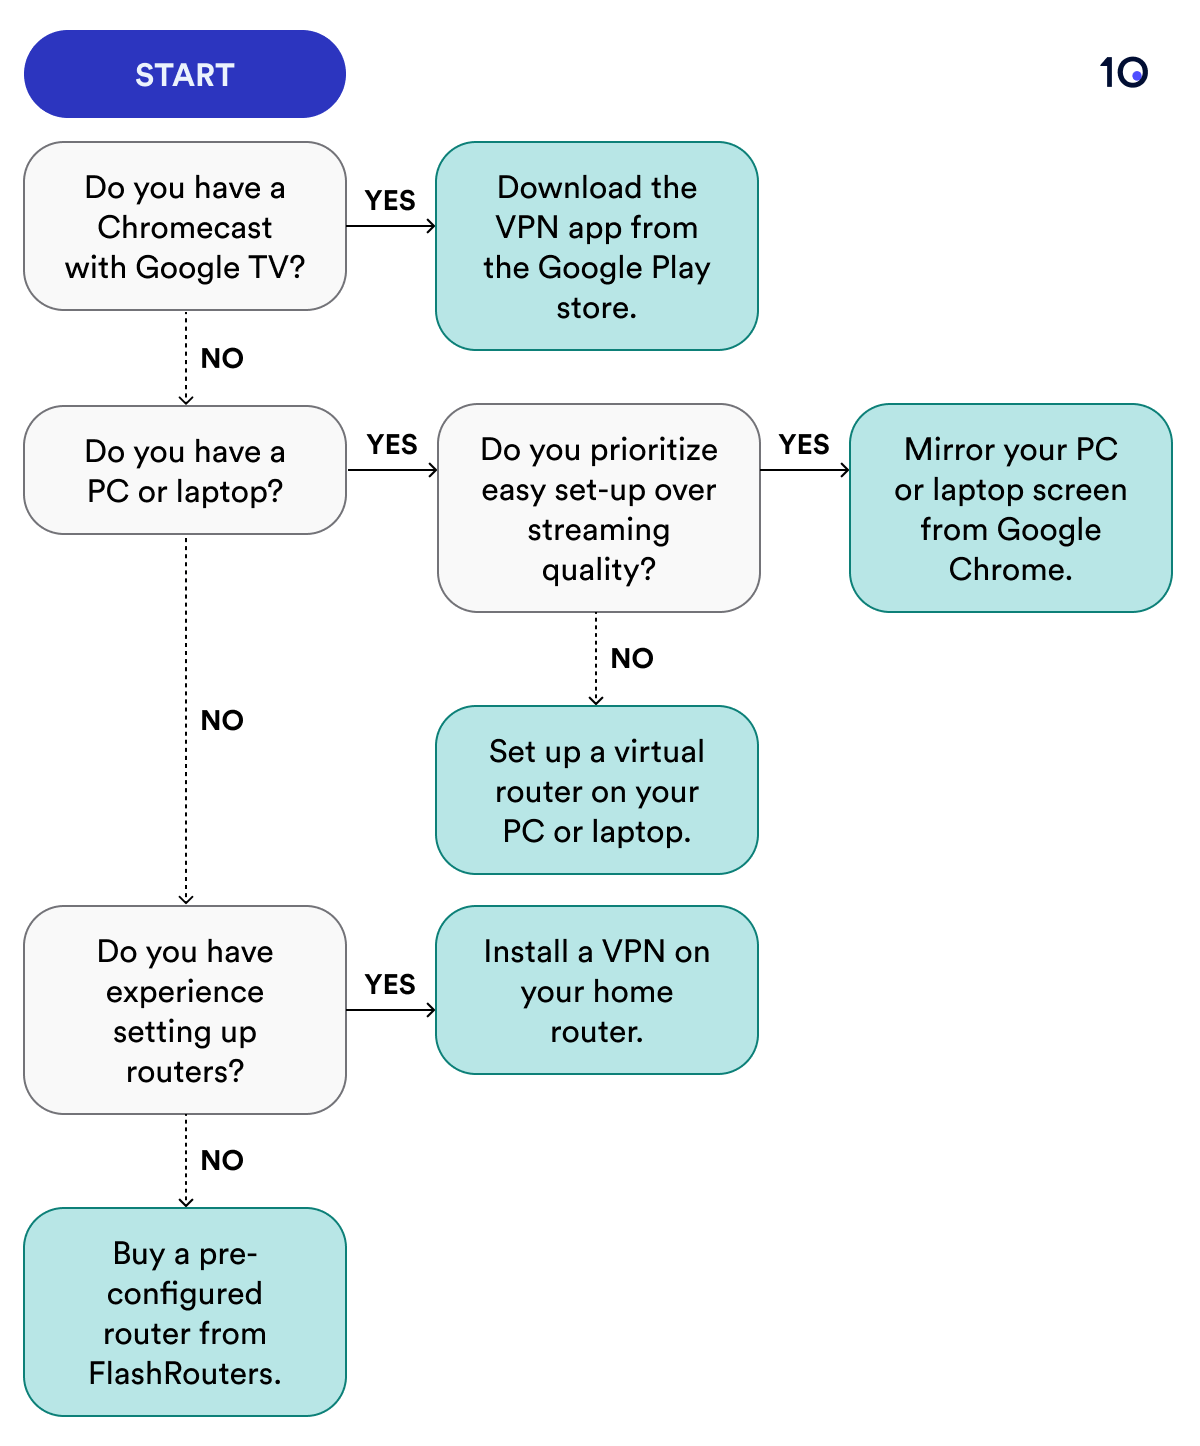 Flowchart providing a decision-making path for setting up a VPN with various Chromecast devices. At the top, a decision point asks if you have a Chromecast with Google TV; if yes, it suggests downloading the VPN app from the Google Play store. If no, the next question asks if you have a PC or laptop, leading to further options based on prioritizing easy setup over streaming quality or setting up a virtual router. If you lack experience setting up routers, the final recommendation is to buy a pre-configured router.